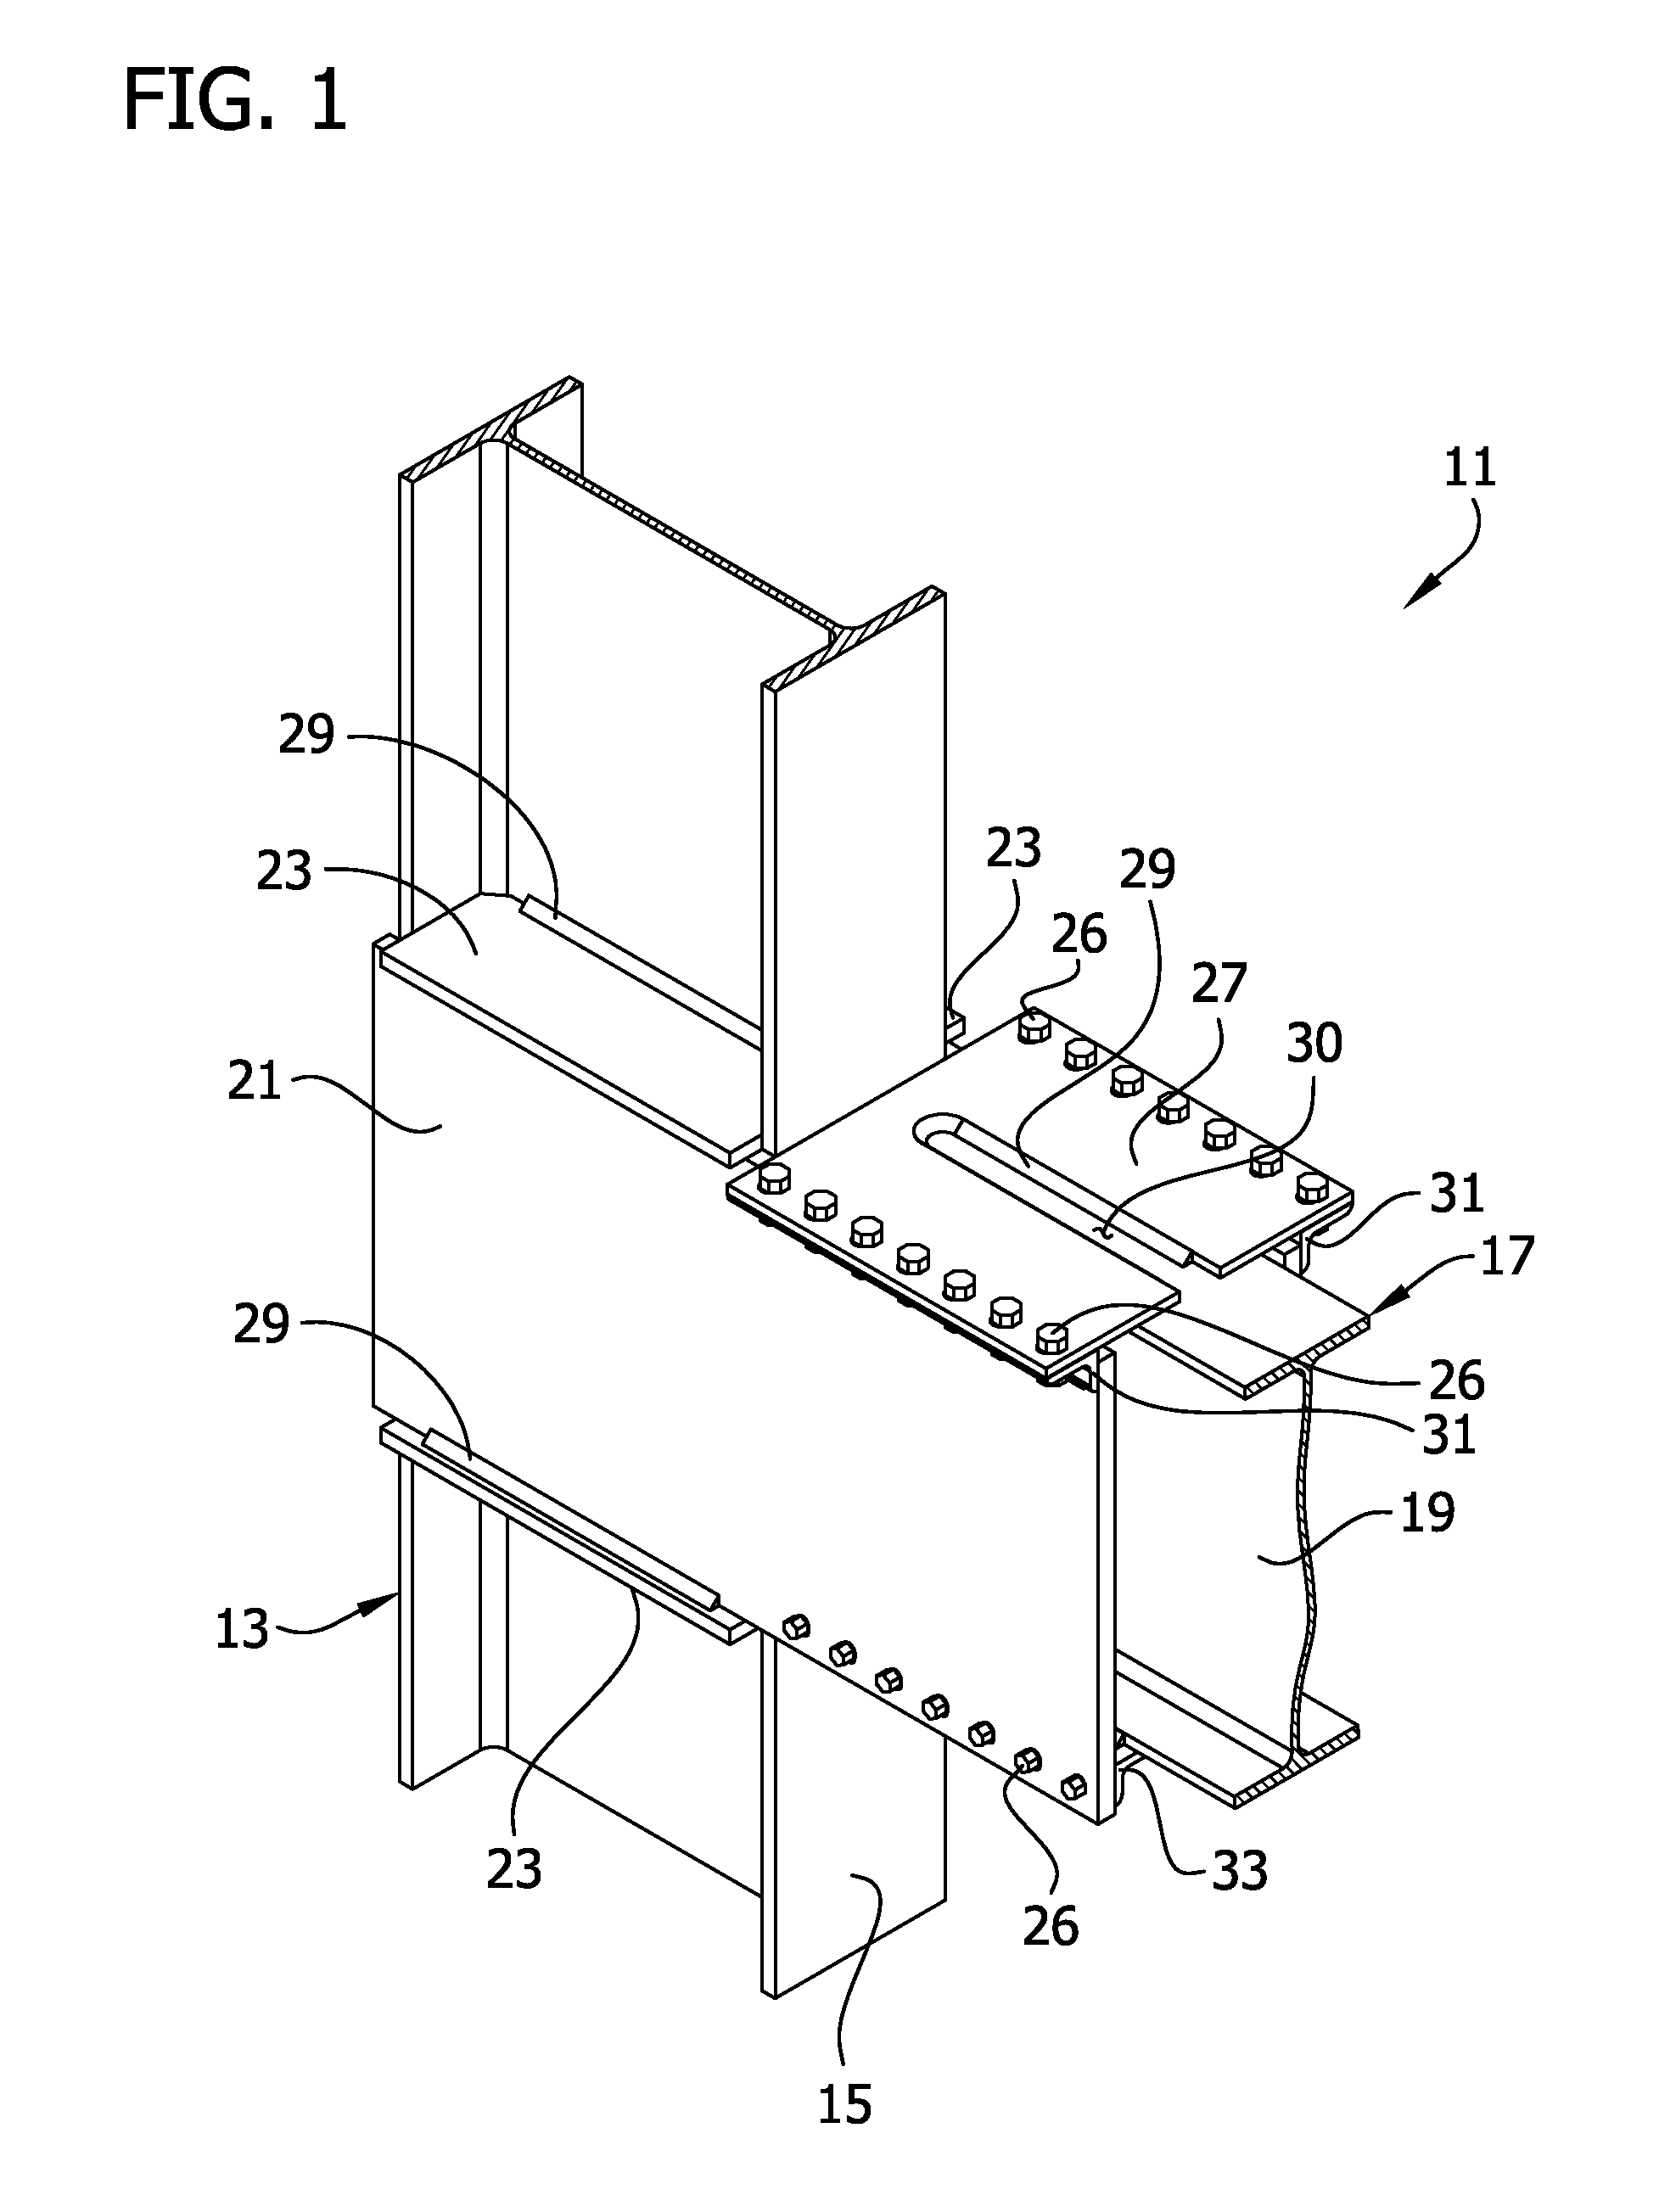 Gusset plate connection in bearing of beam to column